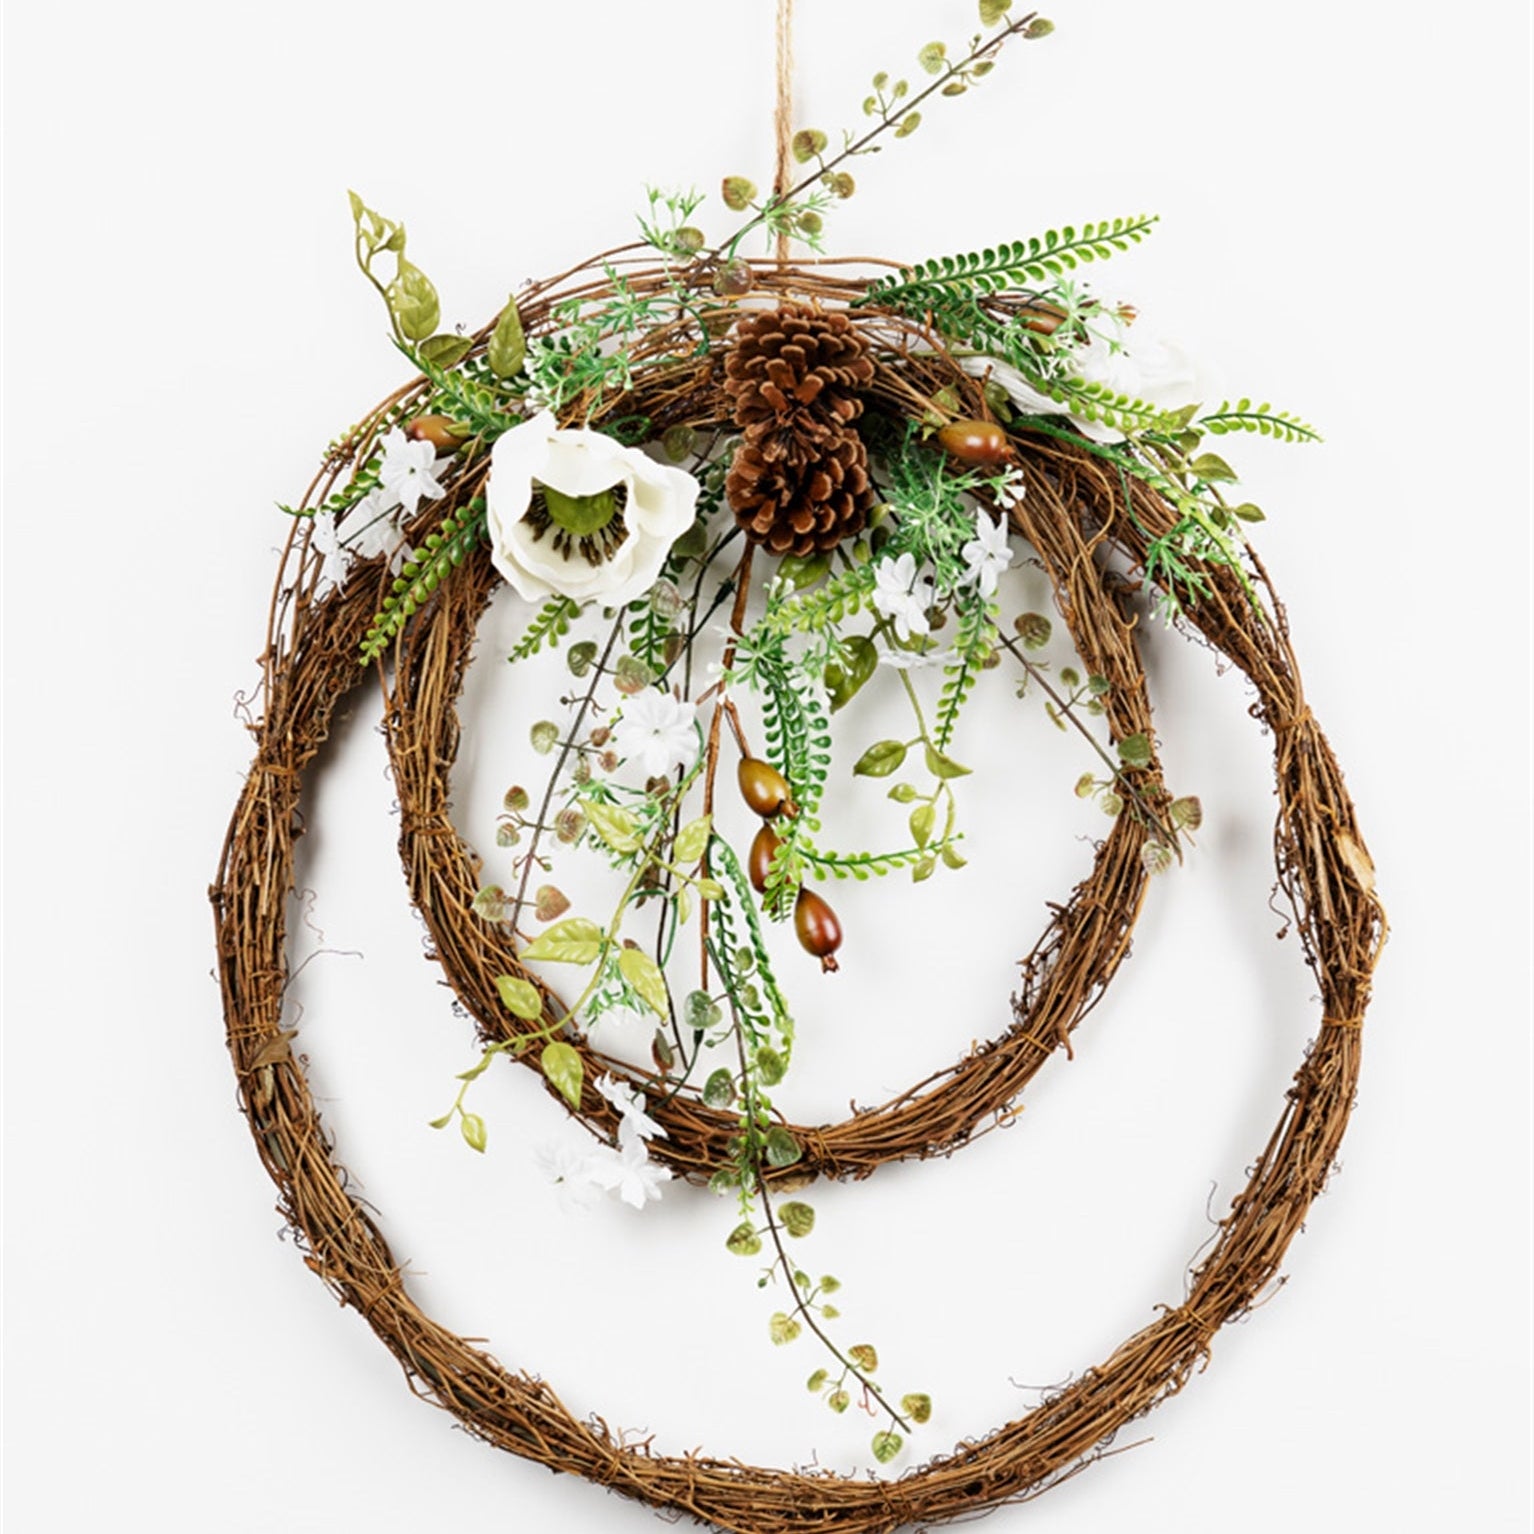 Woven-Rattan-Double-Wreath-with-Magnolia-Accent,-Set-of-2-Wreaths